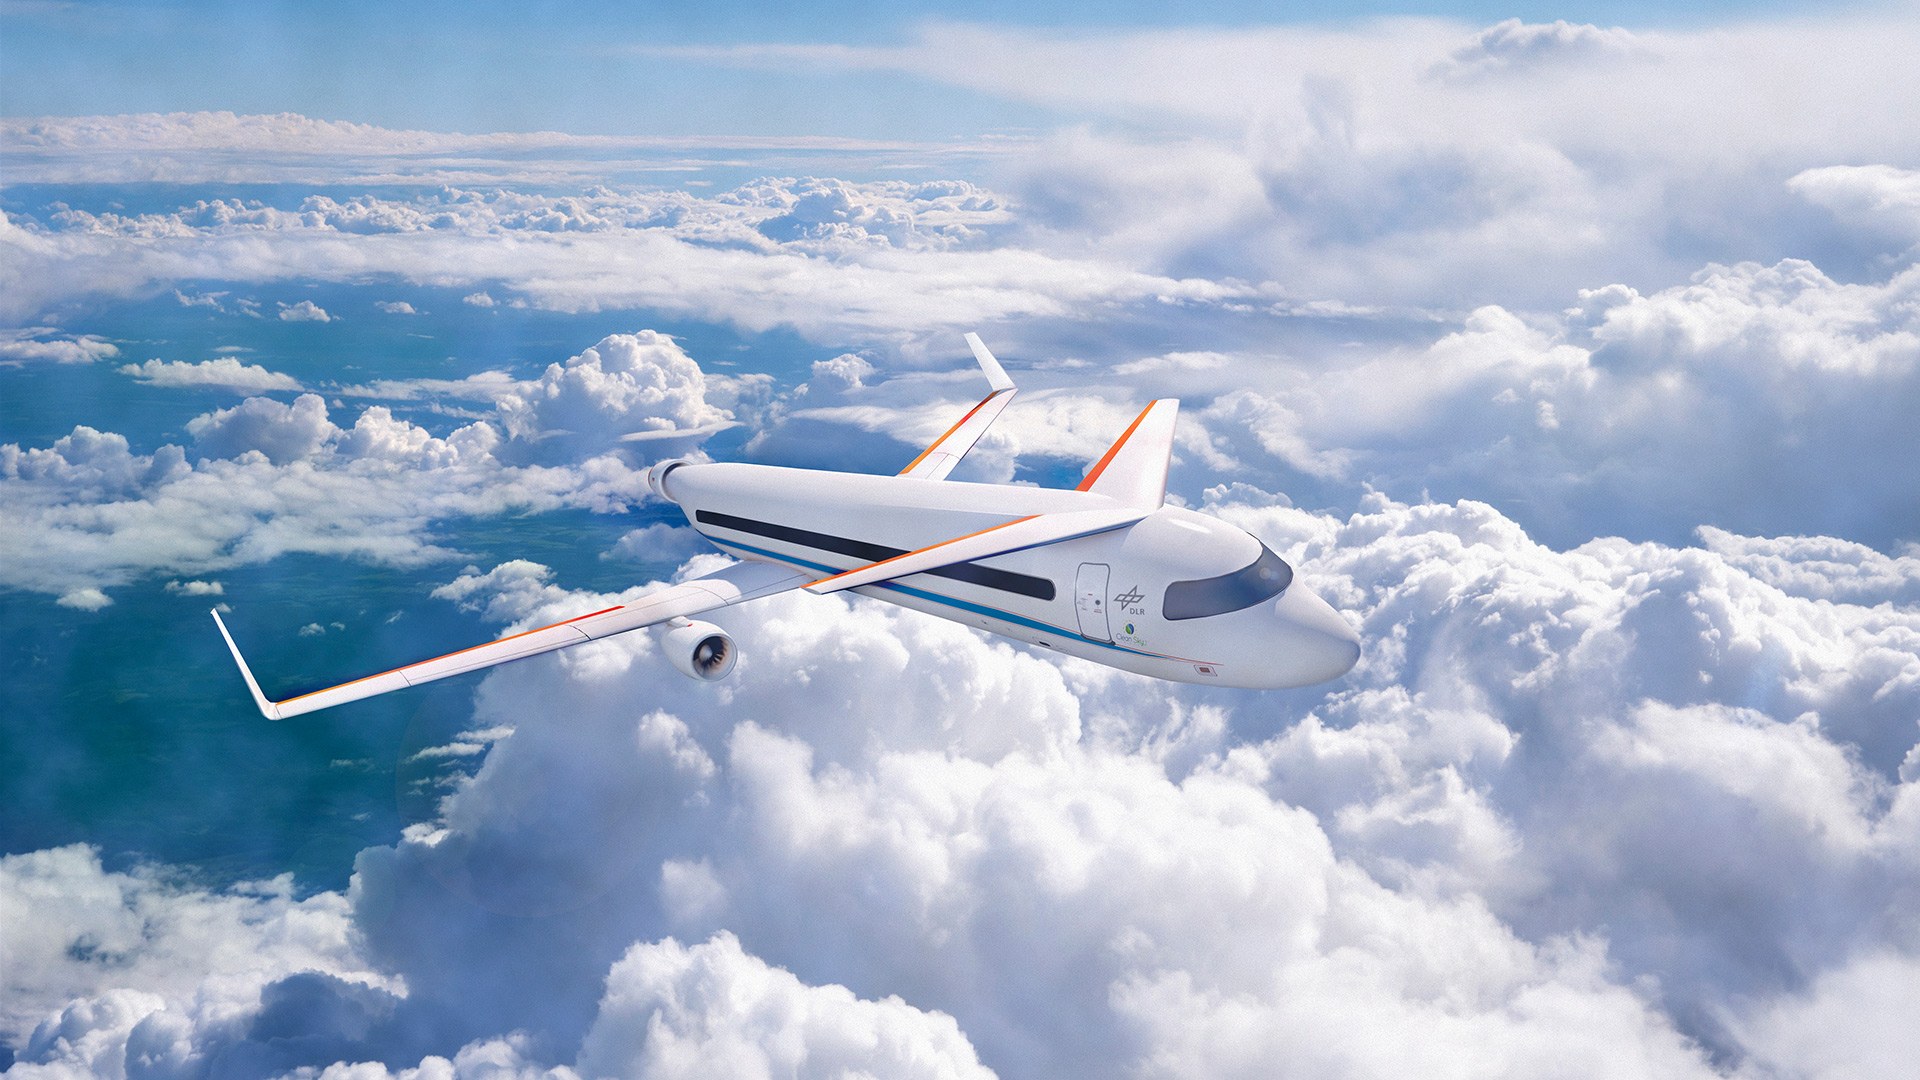 Electric drive enables innovative aircraft concepts